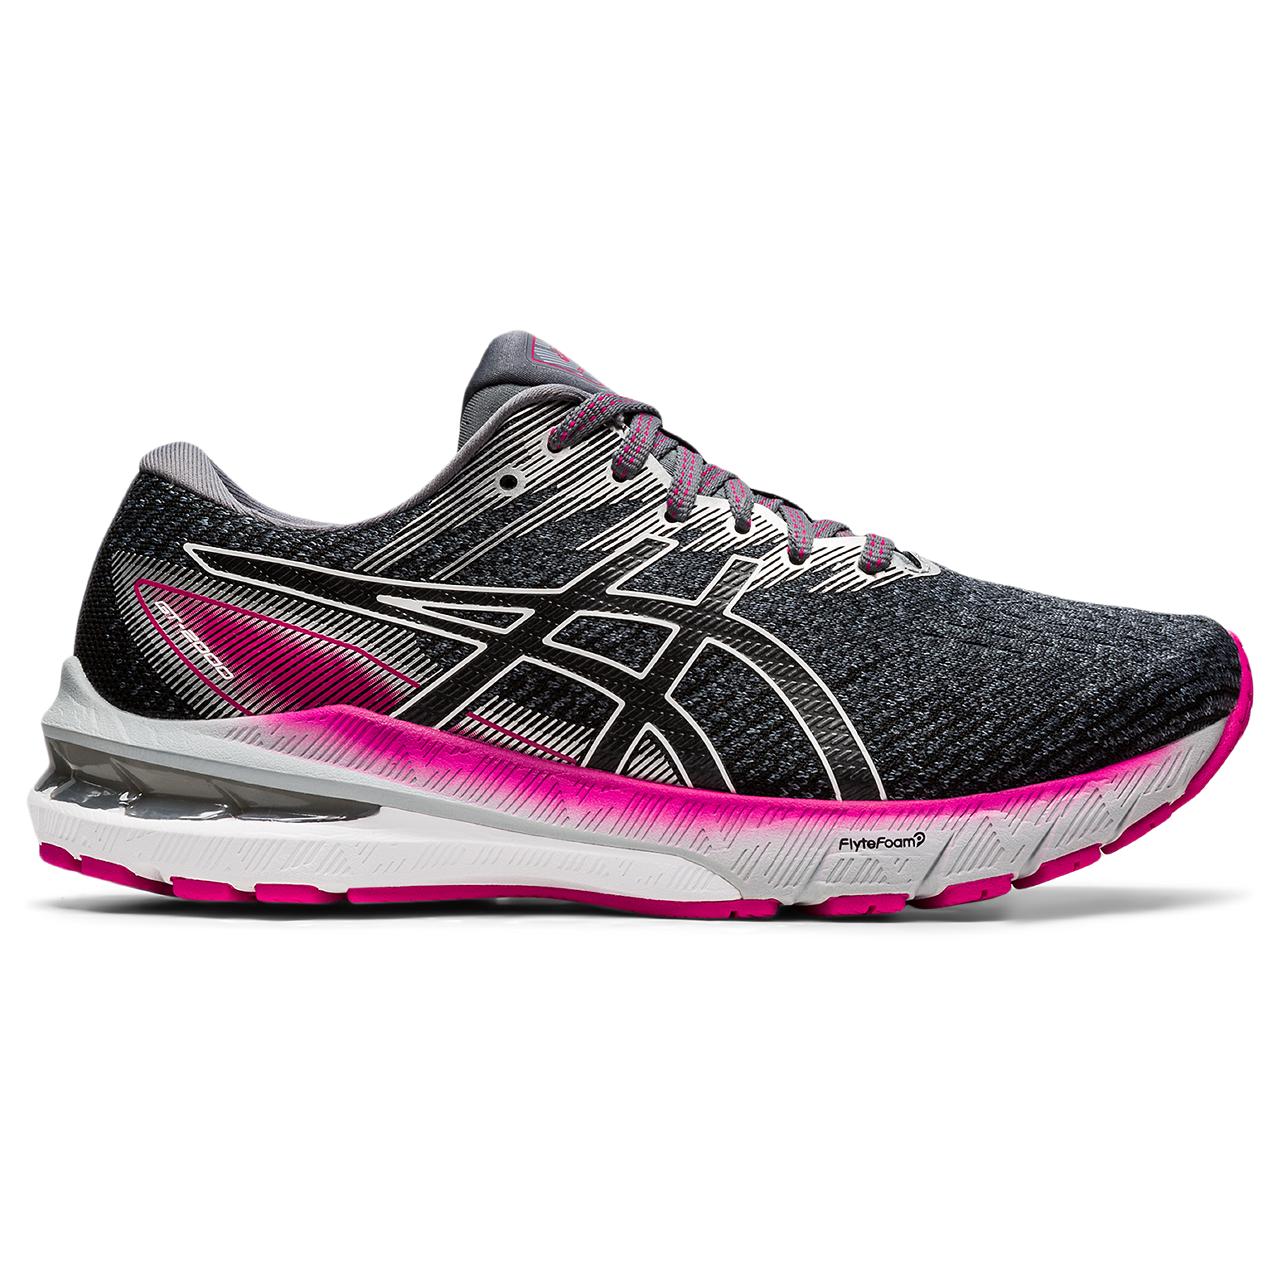 The Women's GT-2000 10 from ASICS is designed to keep your mind and body focused on the road ahead. It's a versatile running style that's great for various distances. No matter if you're looking to stroll around the block or tackle the LA marathon the GT-2000 will be there to support you. This is the women's wide "D" width in the color Sheet Rock / Pink Rave.